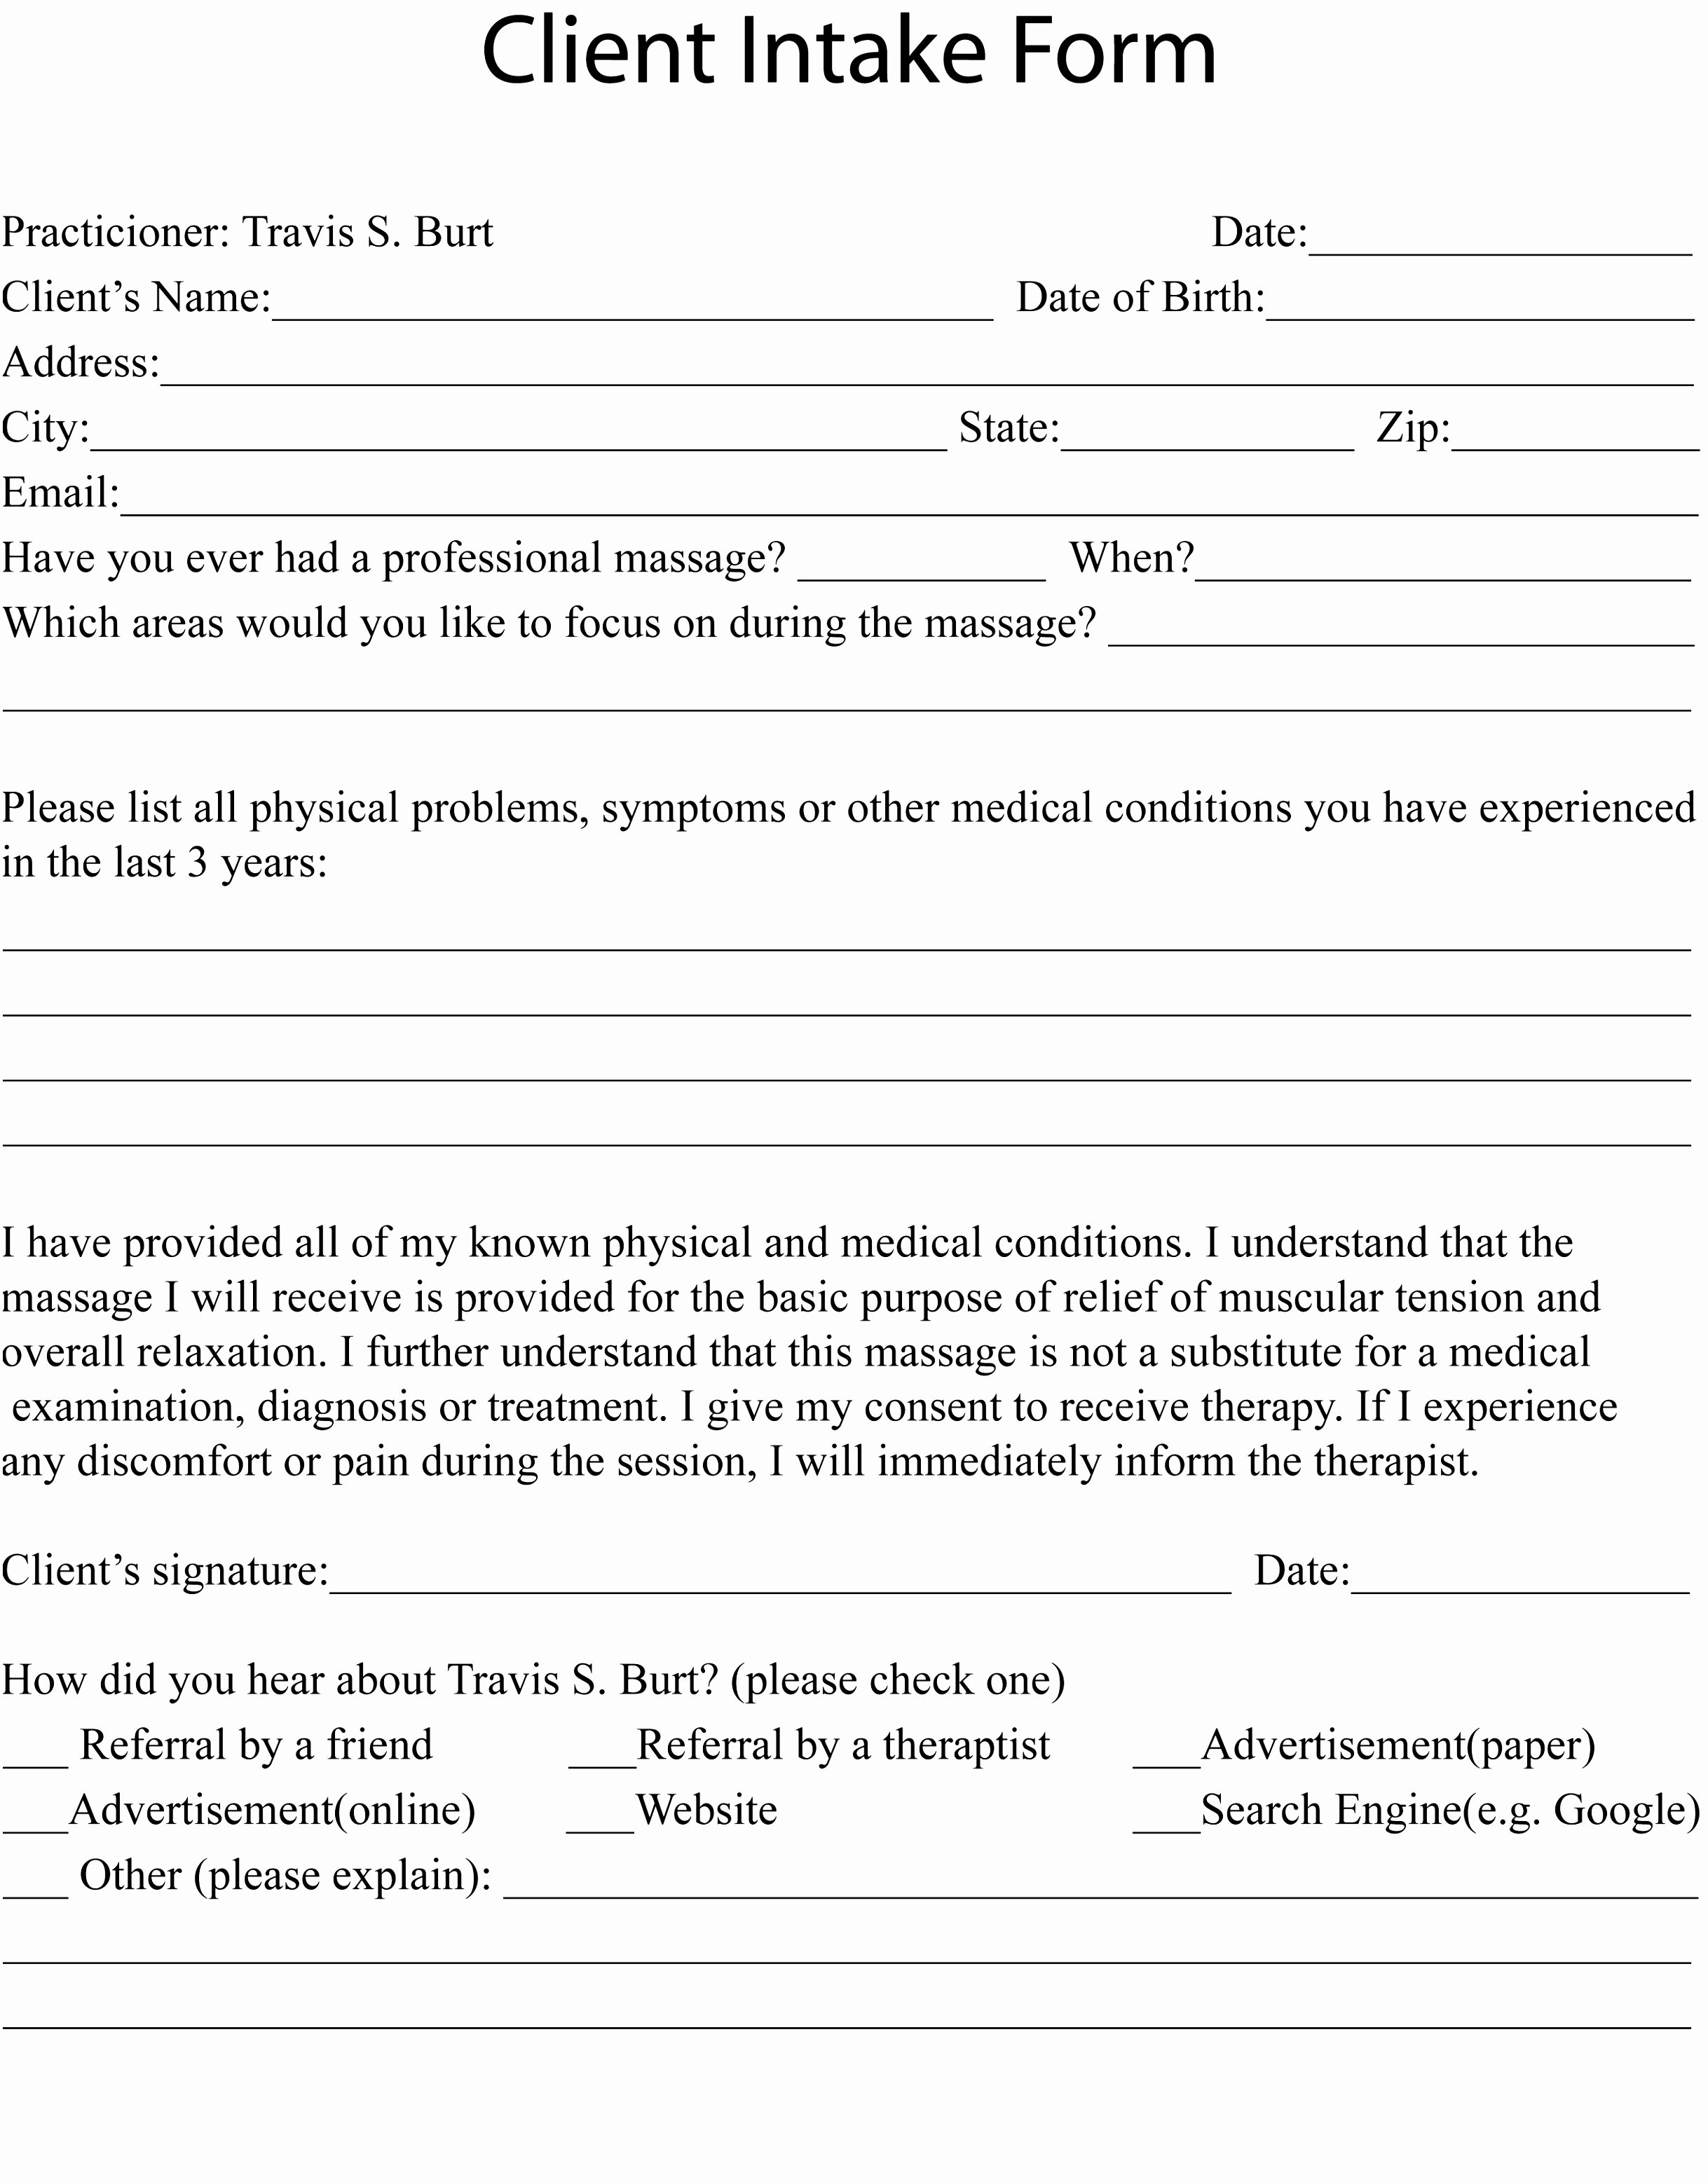 Massage therapy Intake form Template Unique Client Intake forms Printable Client Intake form